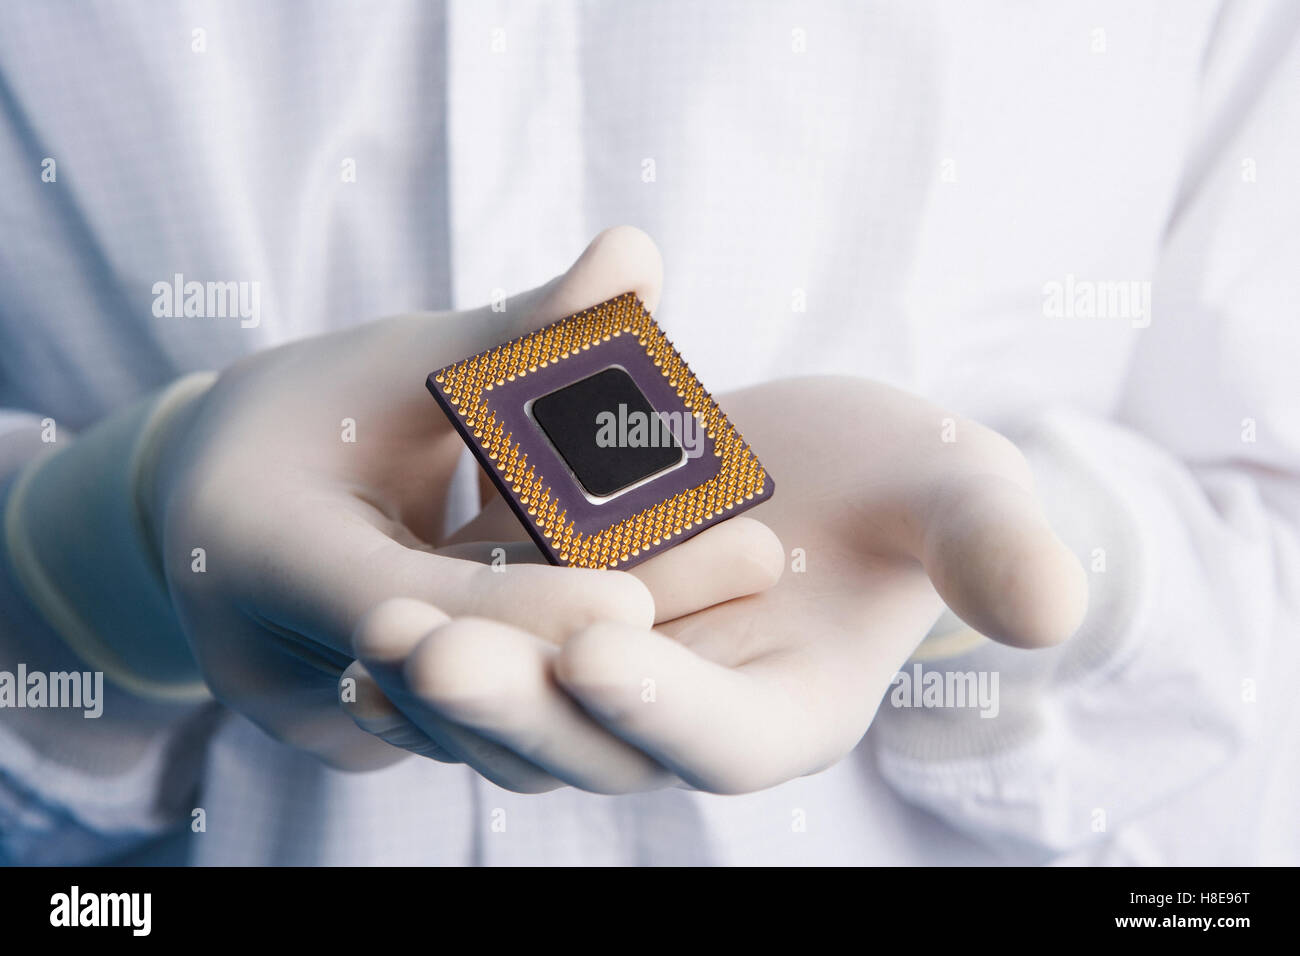 Man in a clean-room suit holding a computer processor Stock Photo